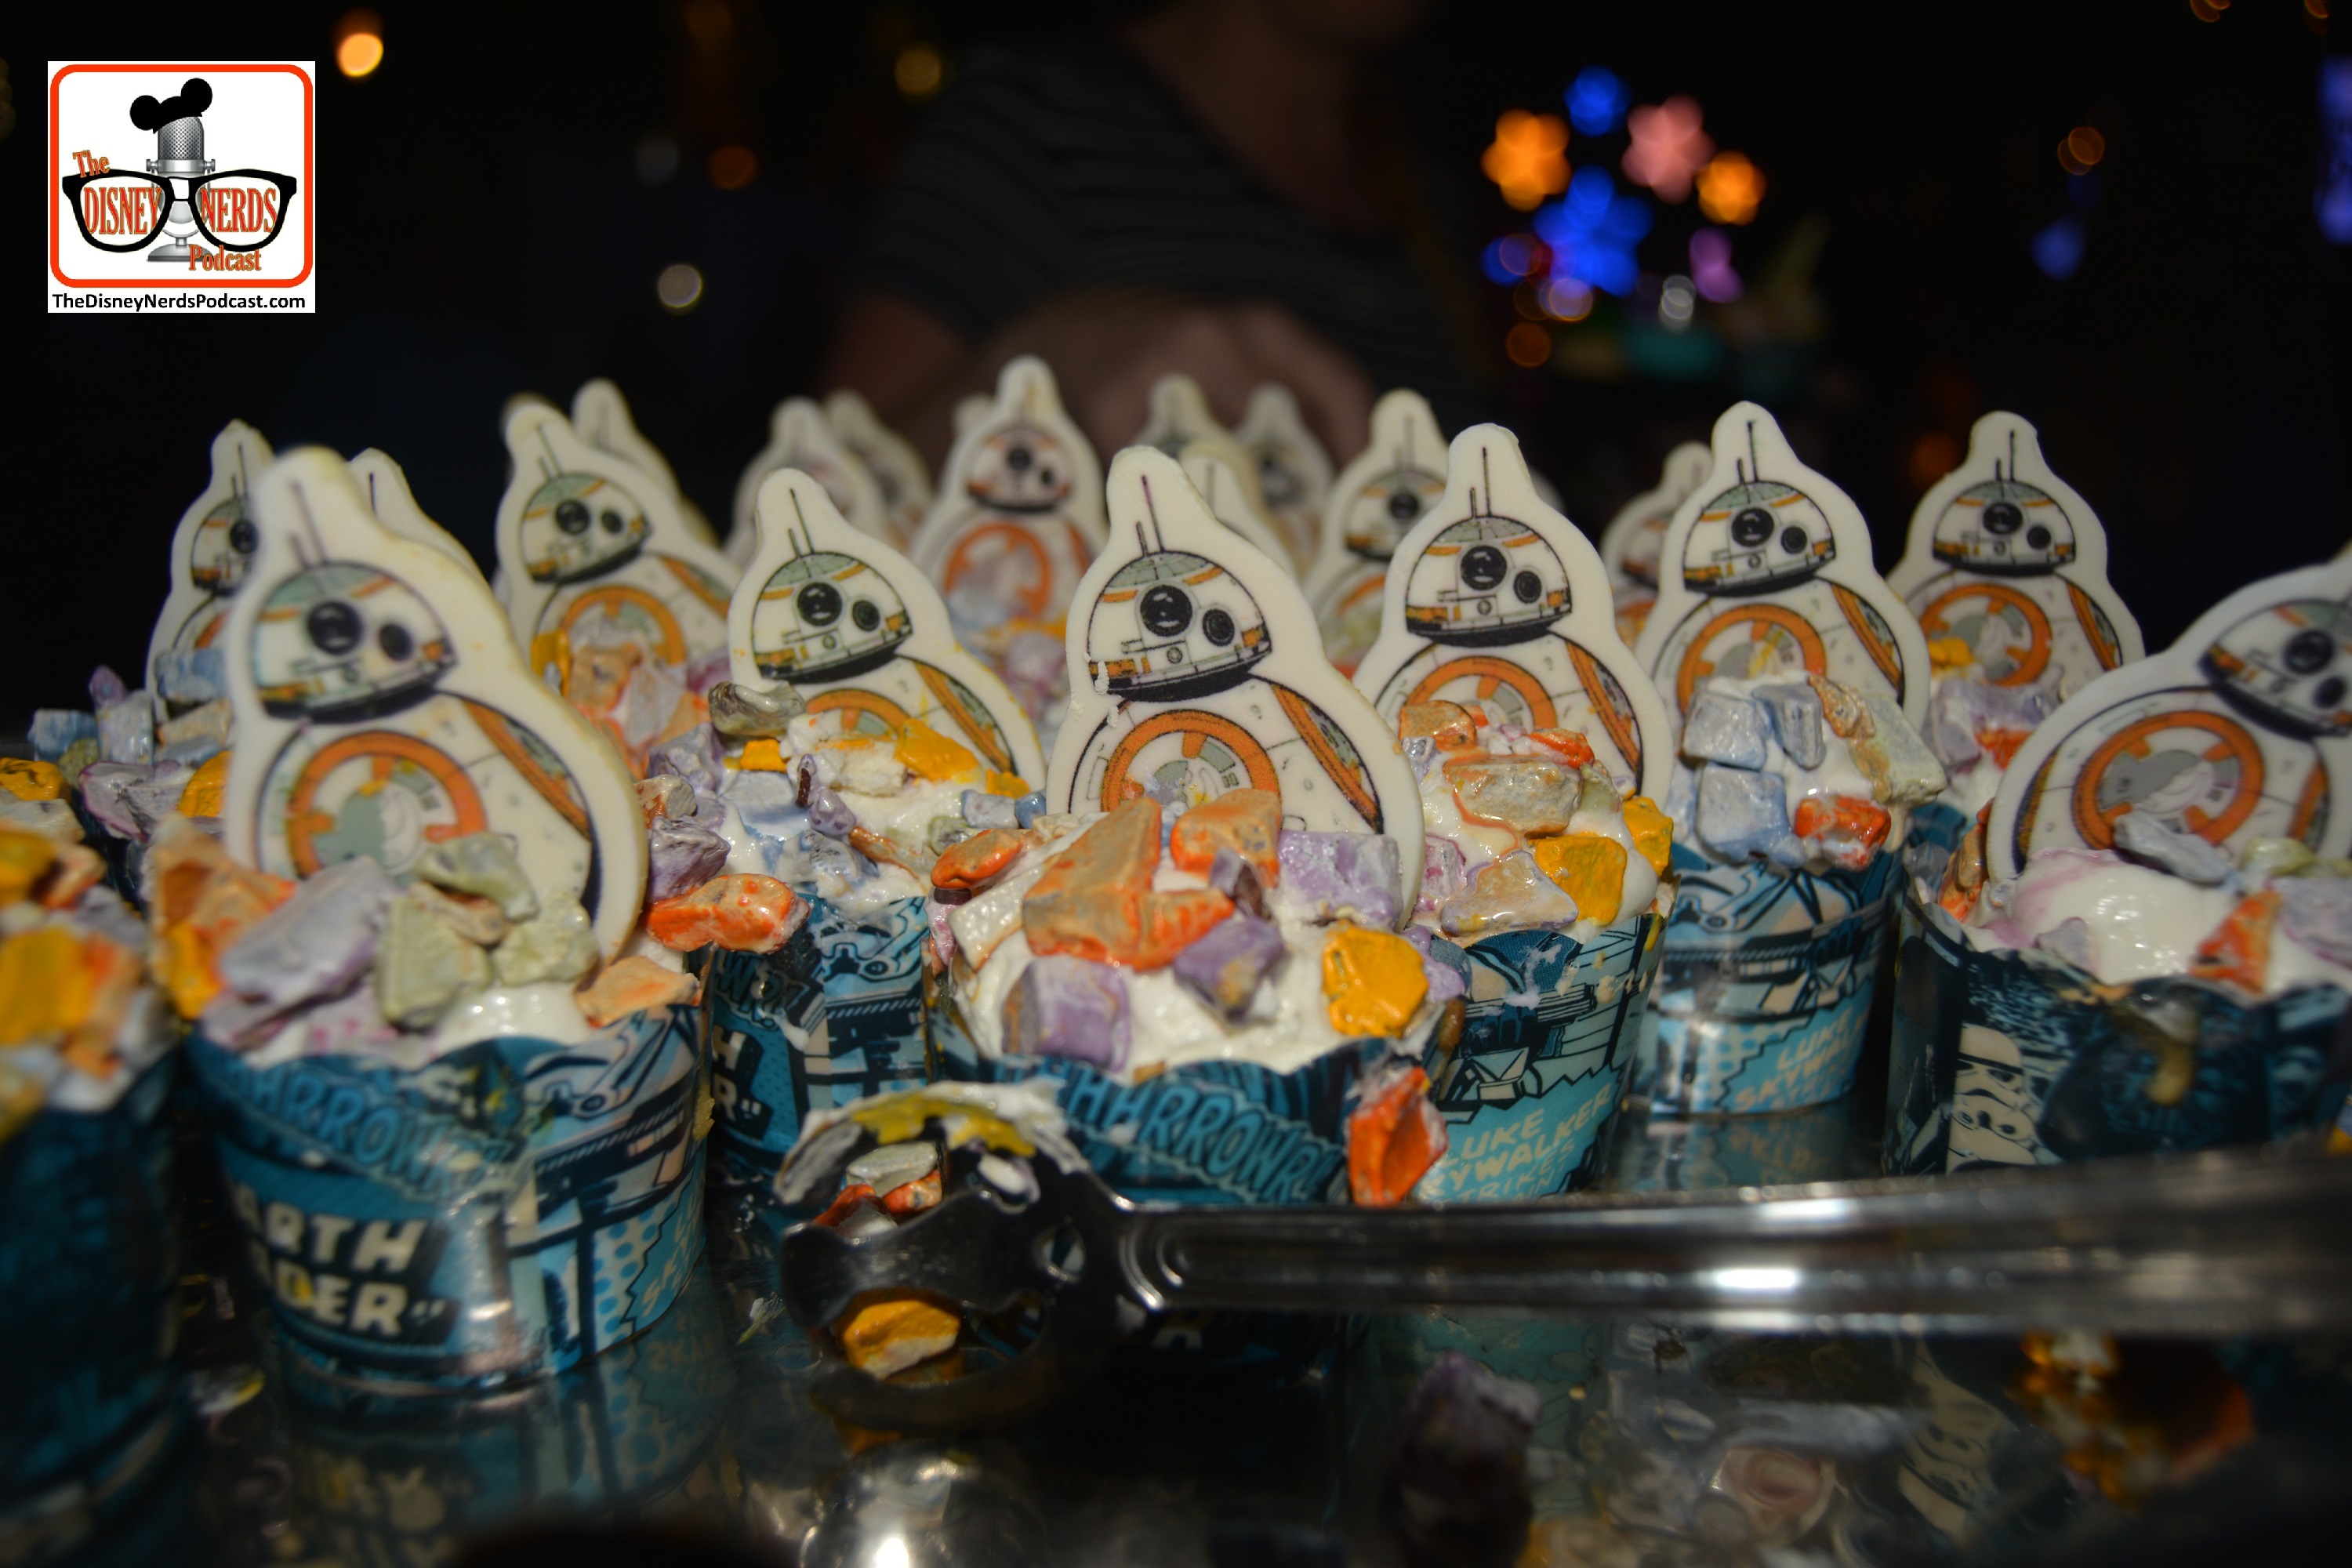 DNP April 2016 Photo Report: Star Wars Symphony in the Stars Dessert Party. Make sure you like "The Disney Nerds Podcast" on facebook - watch the live stream from the dessert party with fireworks.